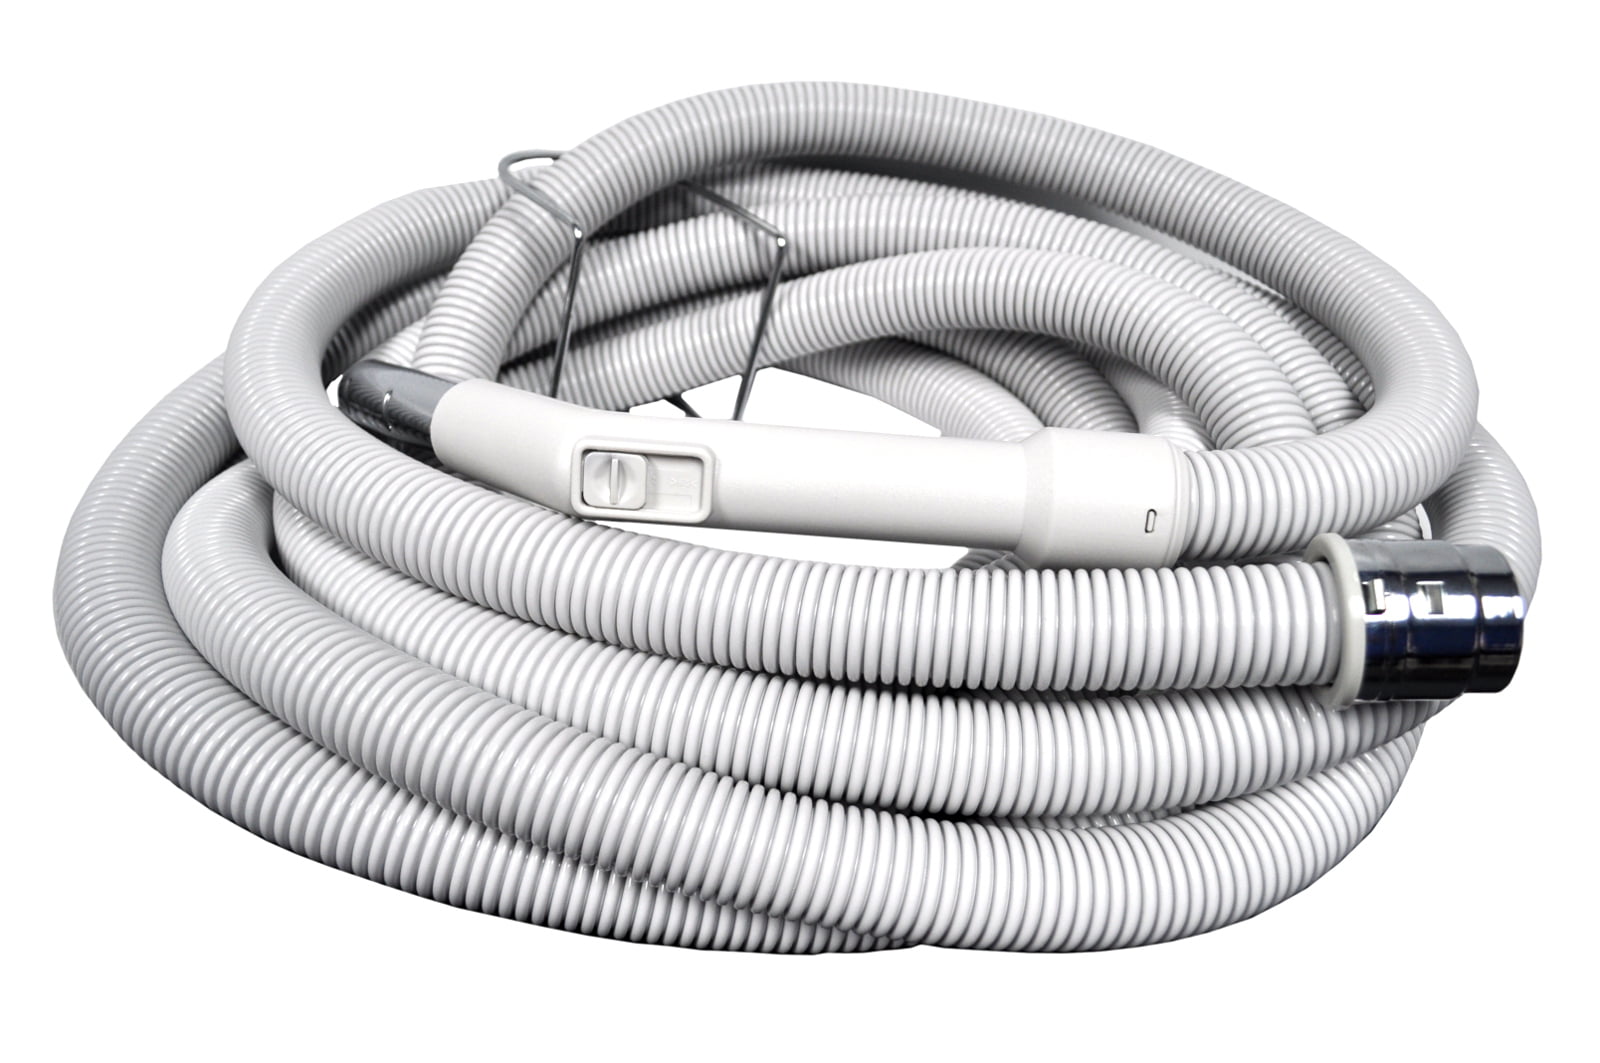 Generic Electrolux Central Vacuum Cleaner 35 Feet Long Direct Connect Hose 